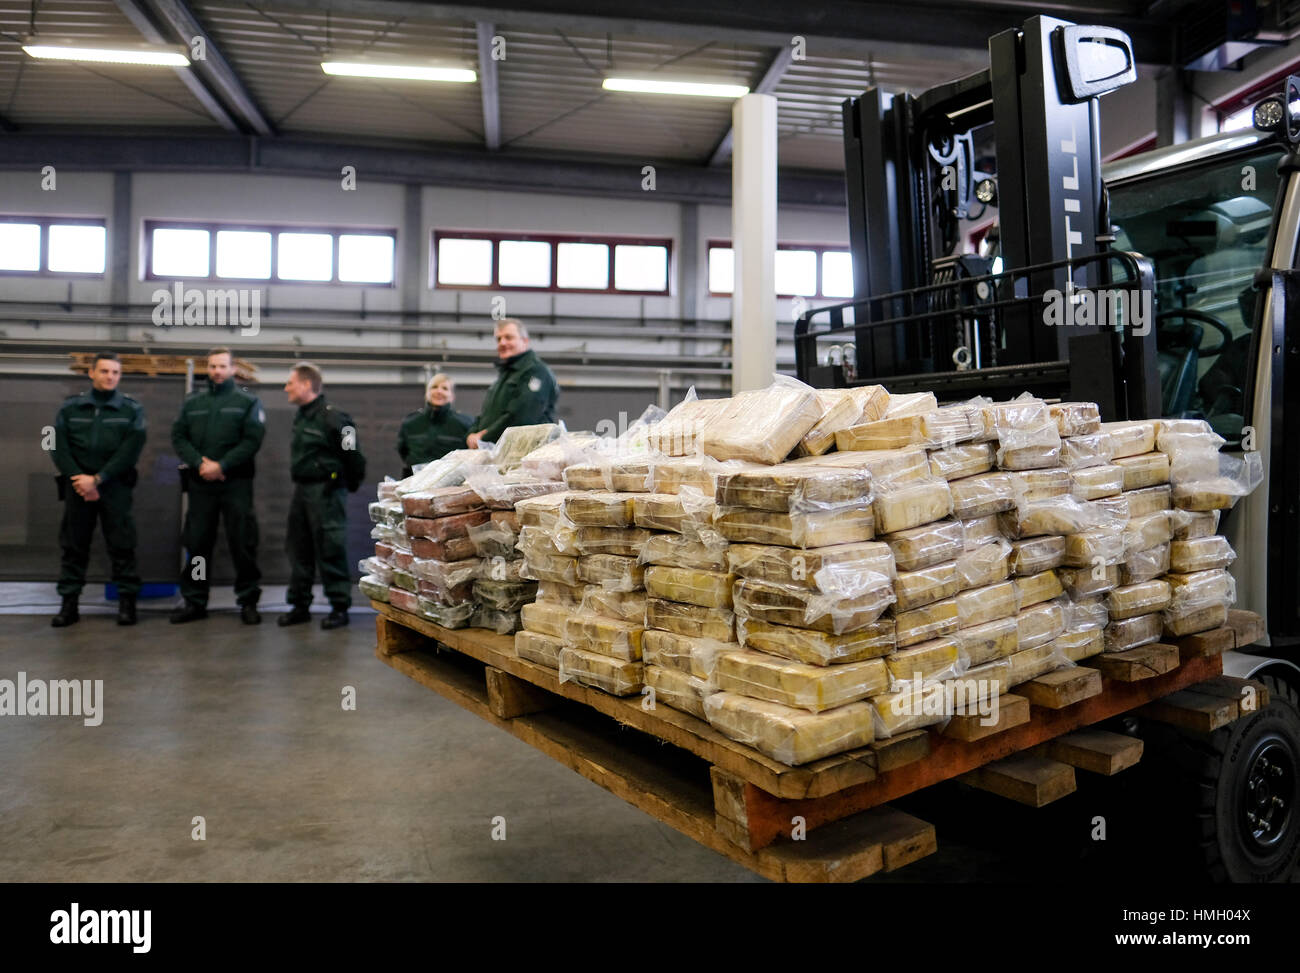 Hamburg, Germany. 03rd Feb, 2017. Customs investigators stands next to a forklift carrying a pallet of cocaine packages in Hamburg, Germany, 03 February 2017. A container carrying 717 kilos of cocaine with a sale price of 145 million euros was seized in the Port of Hamburg. The director of the customs investigation office says it may be the largest amount of cocaine to have ever been seized in Germany. Photo: Axel Heimken/dpa/Alamy Live News Stock Photo